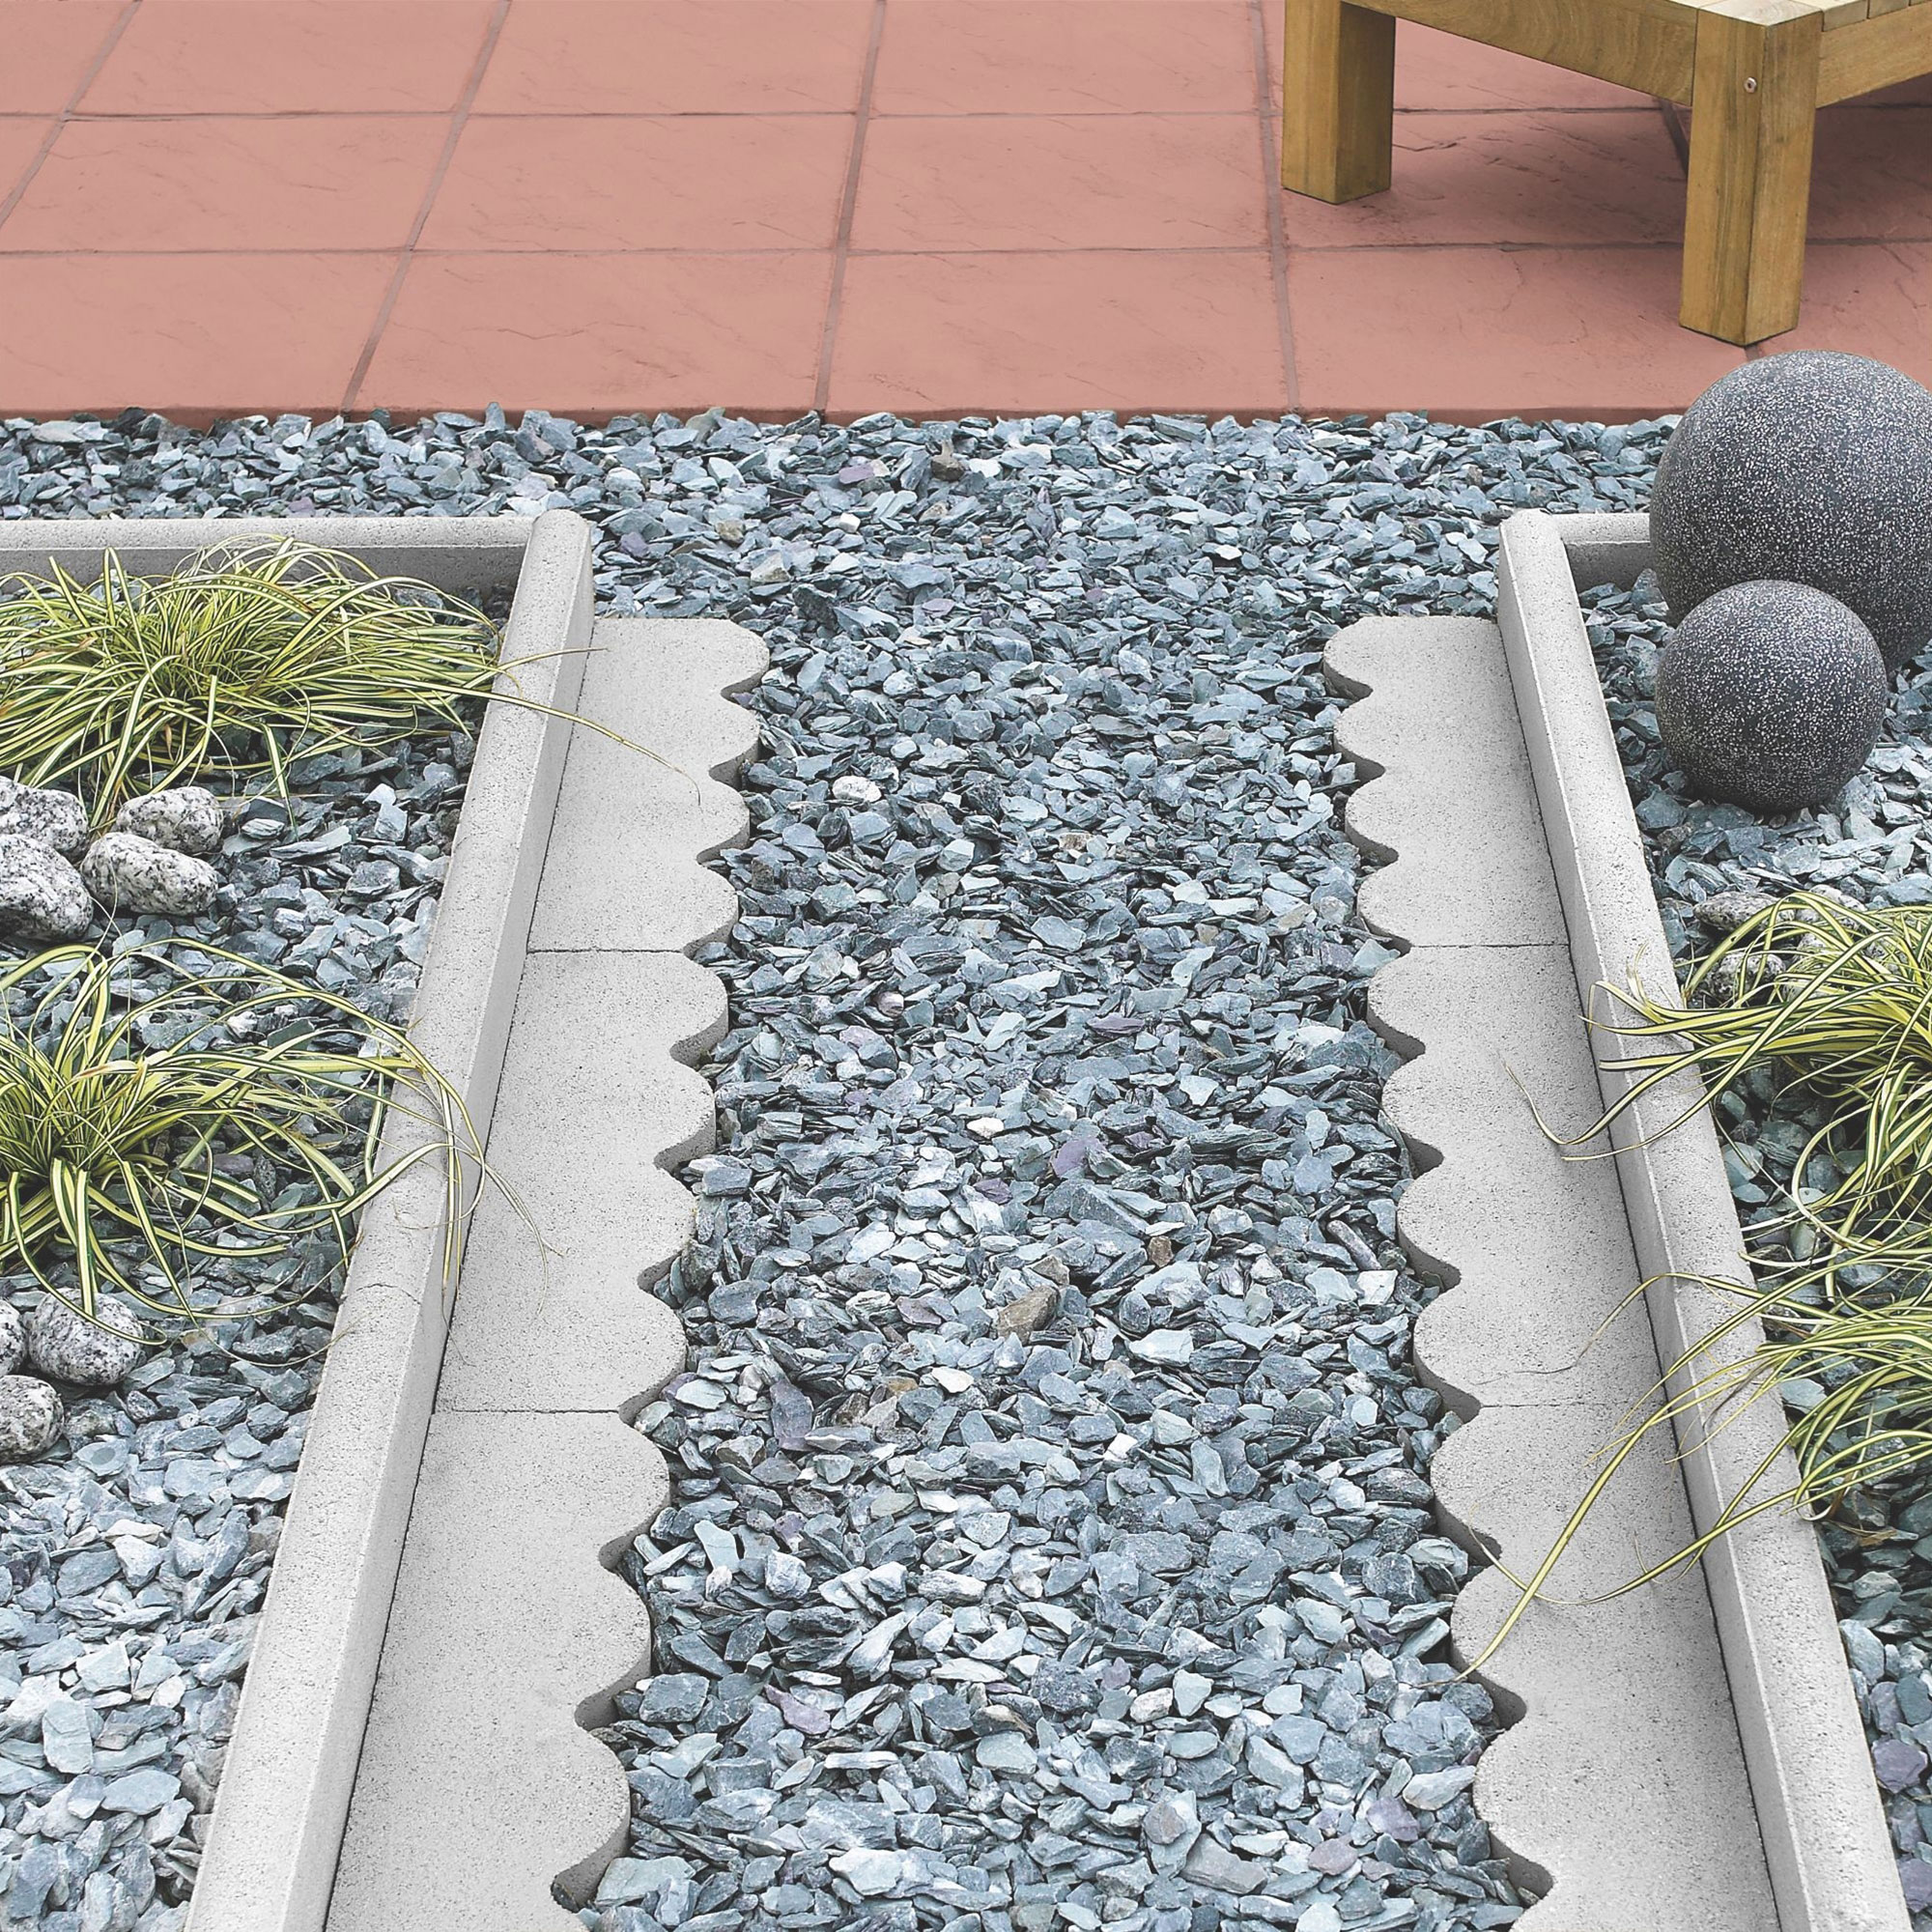 Paving edge in wibbly line alongside path of stones